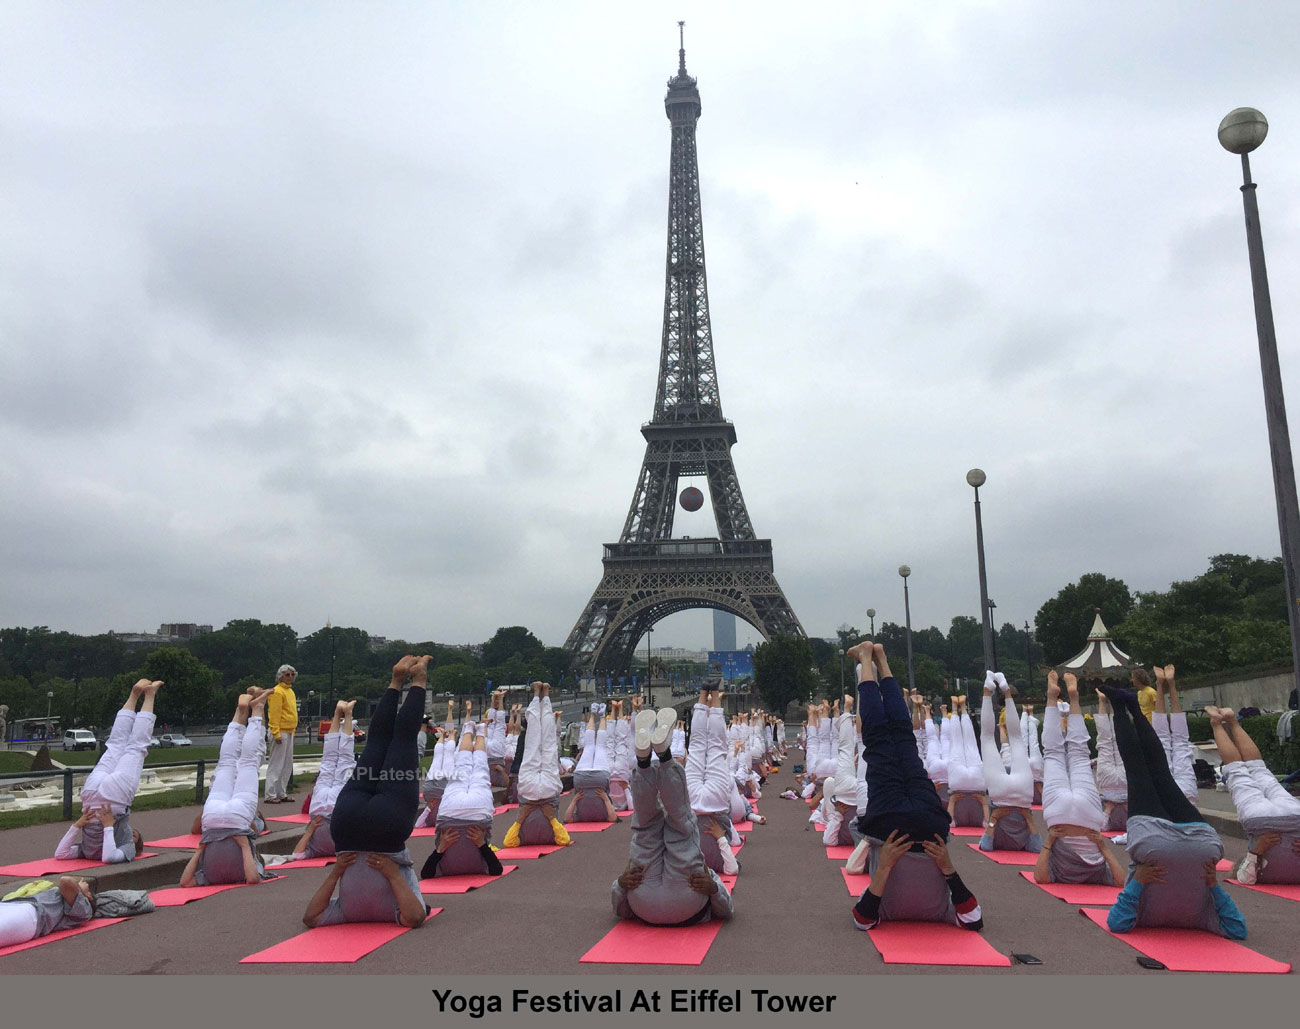 Euro Cup and Yoga Festival at Eiffel Tower Rocked Paris - Picture 2